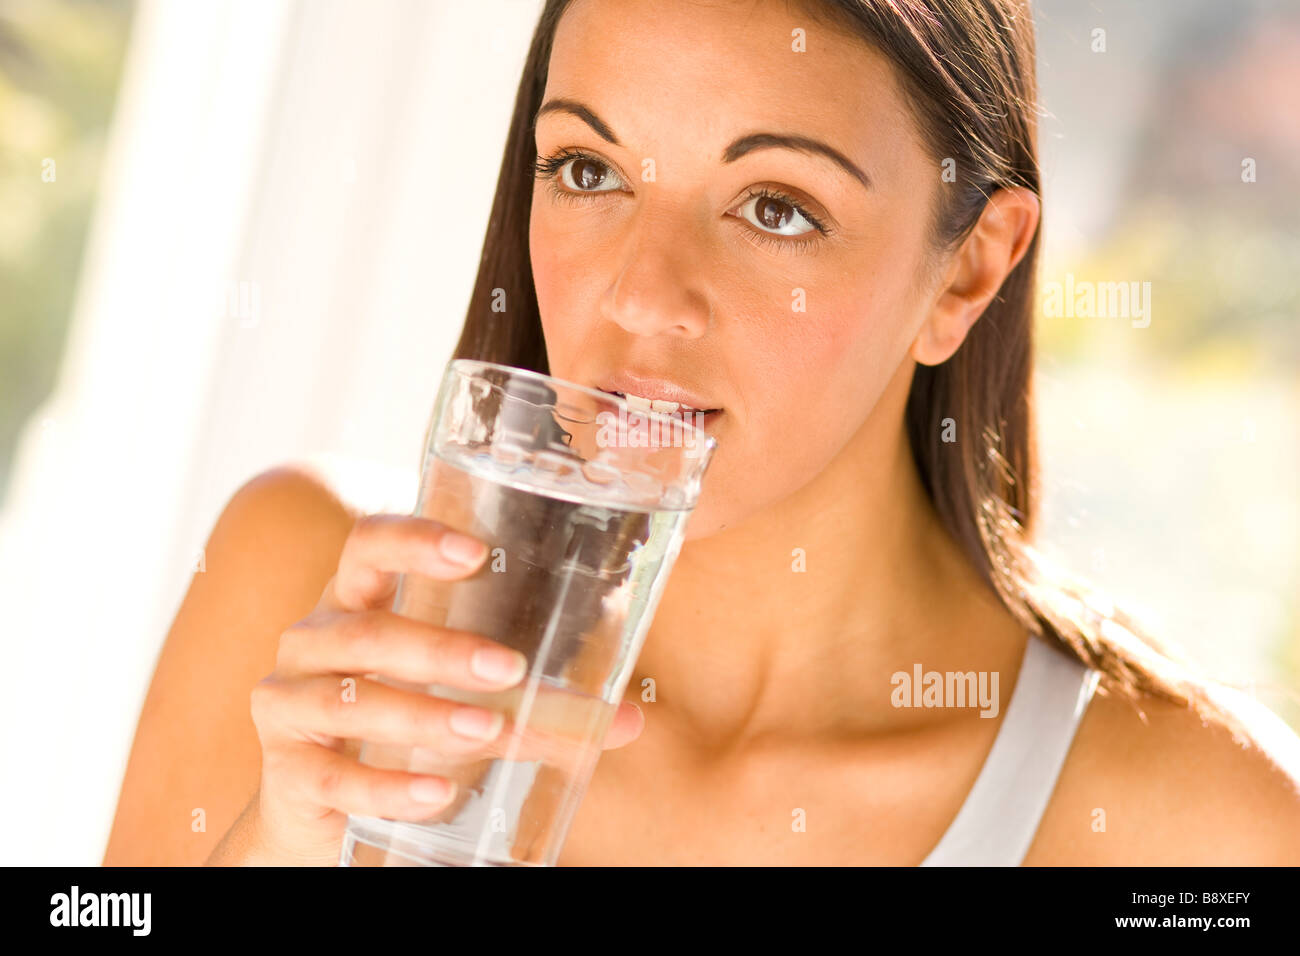 Girl drinking glass of water Stock Photo